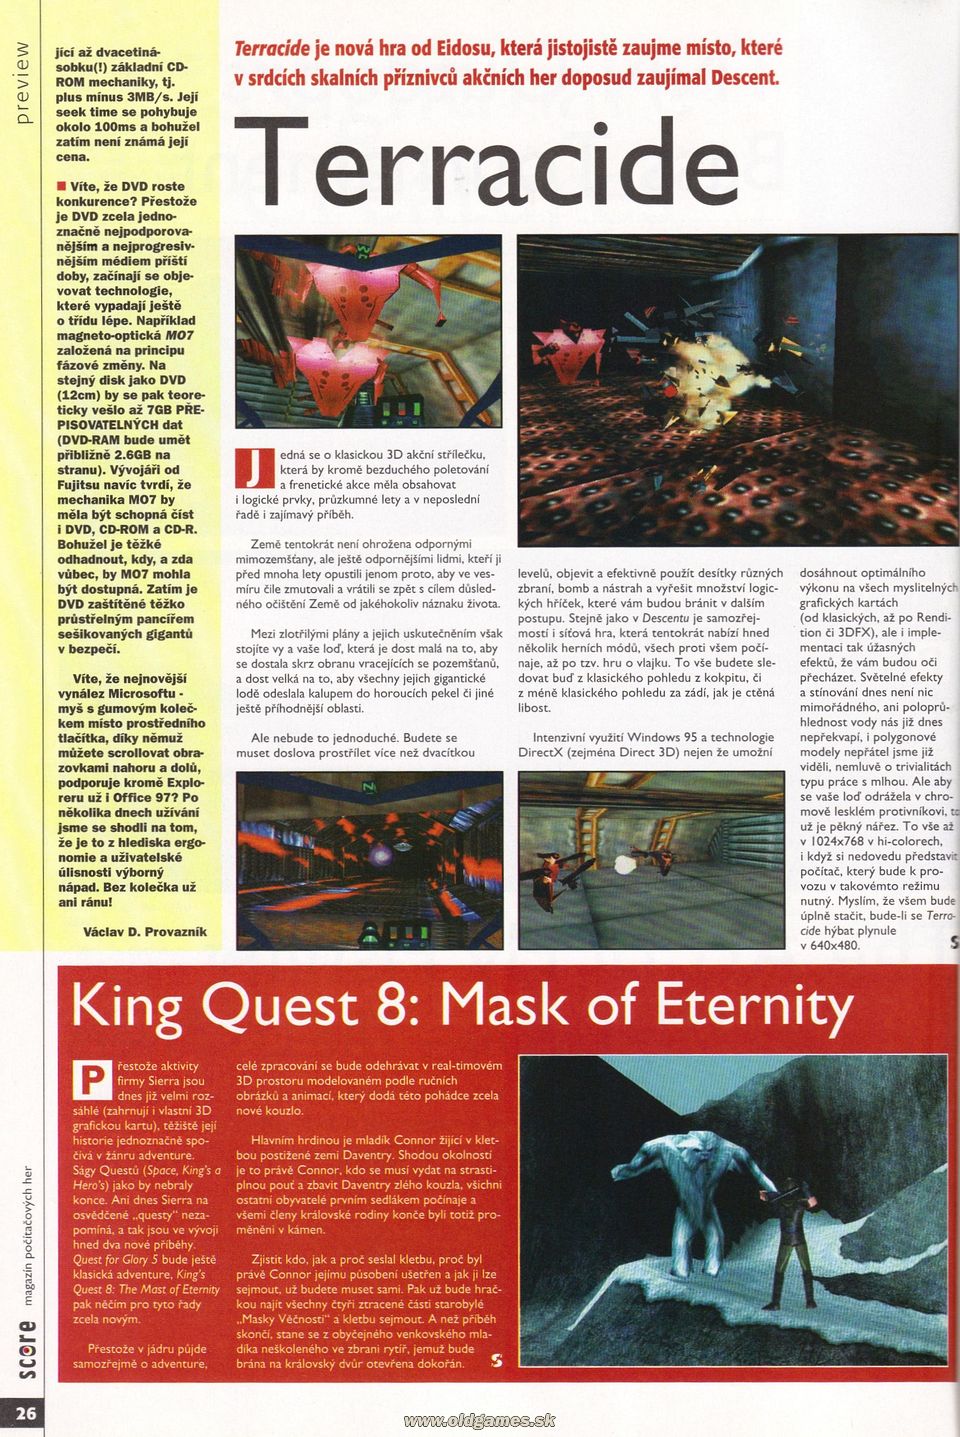 Preview: Terracide, King Quest 8